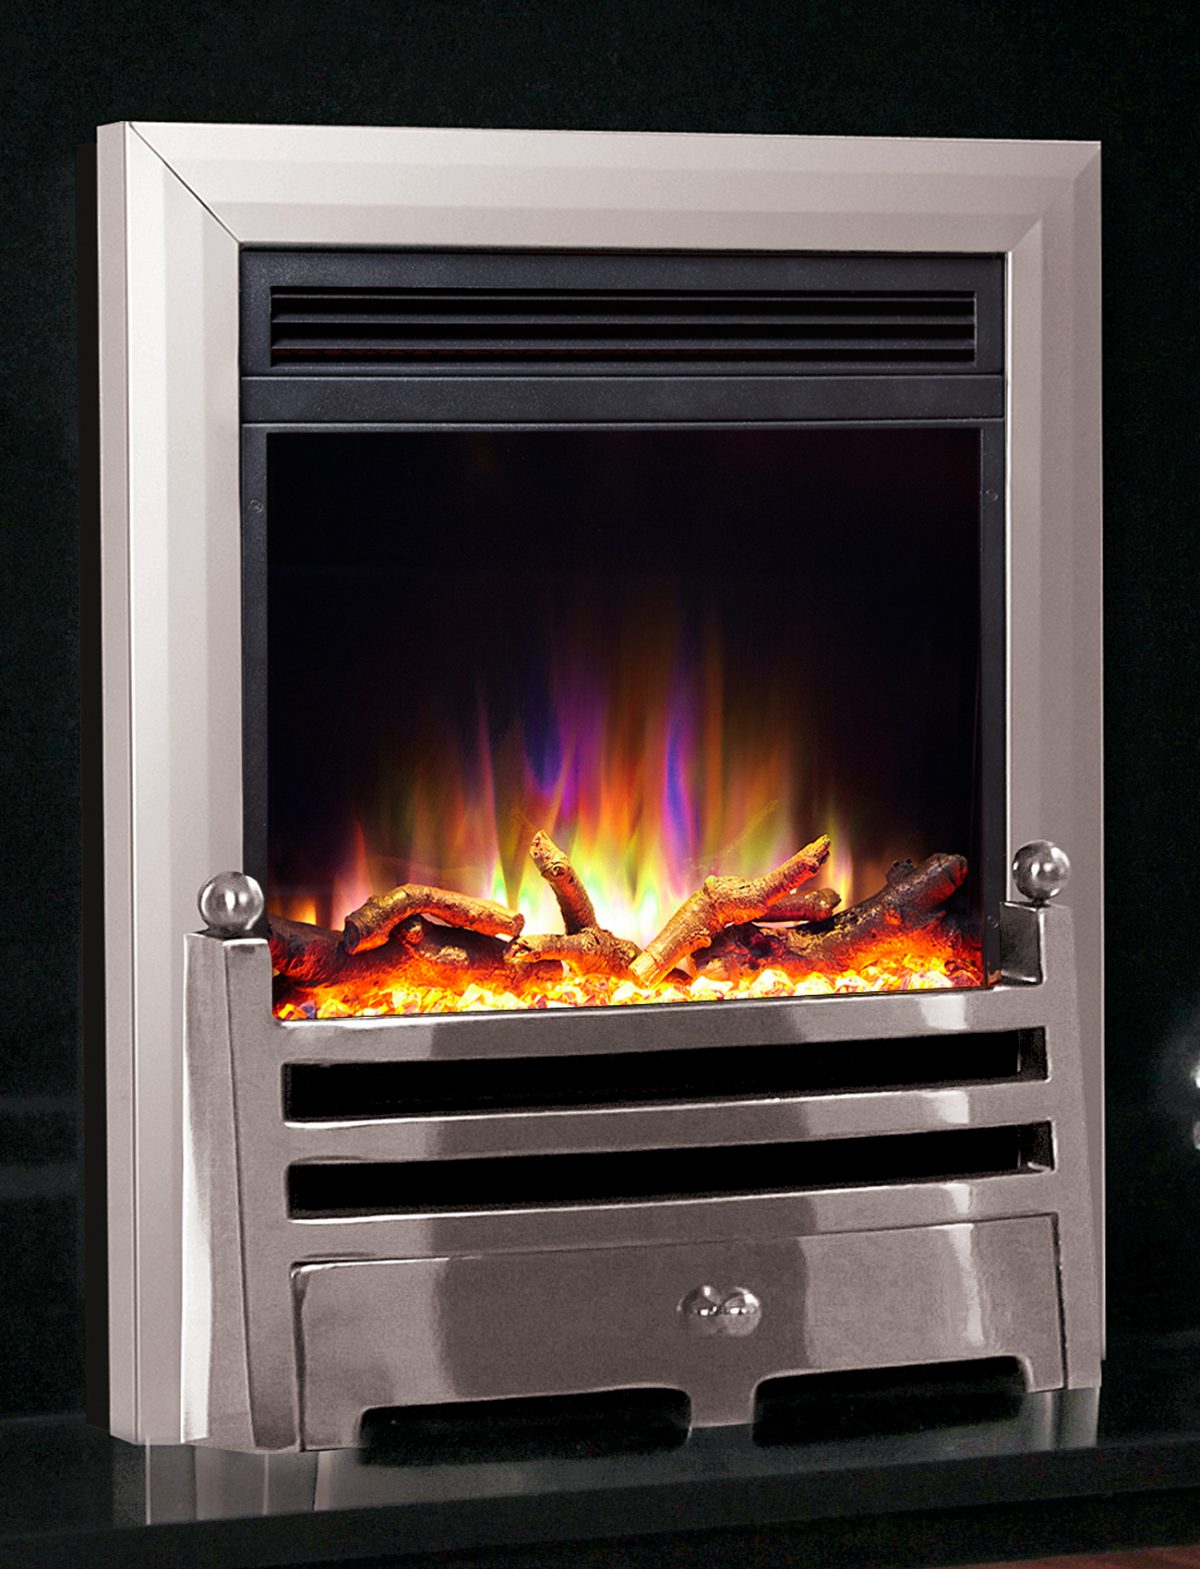 Celsi Electriflame XD Hearth Mounted Bauhaus Electric Fire in Satin Silver